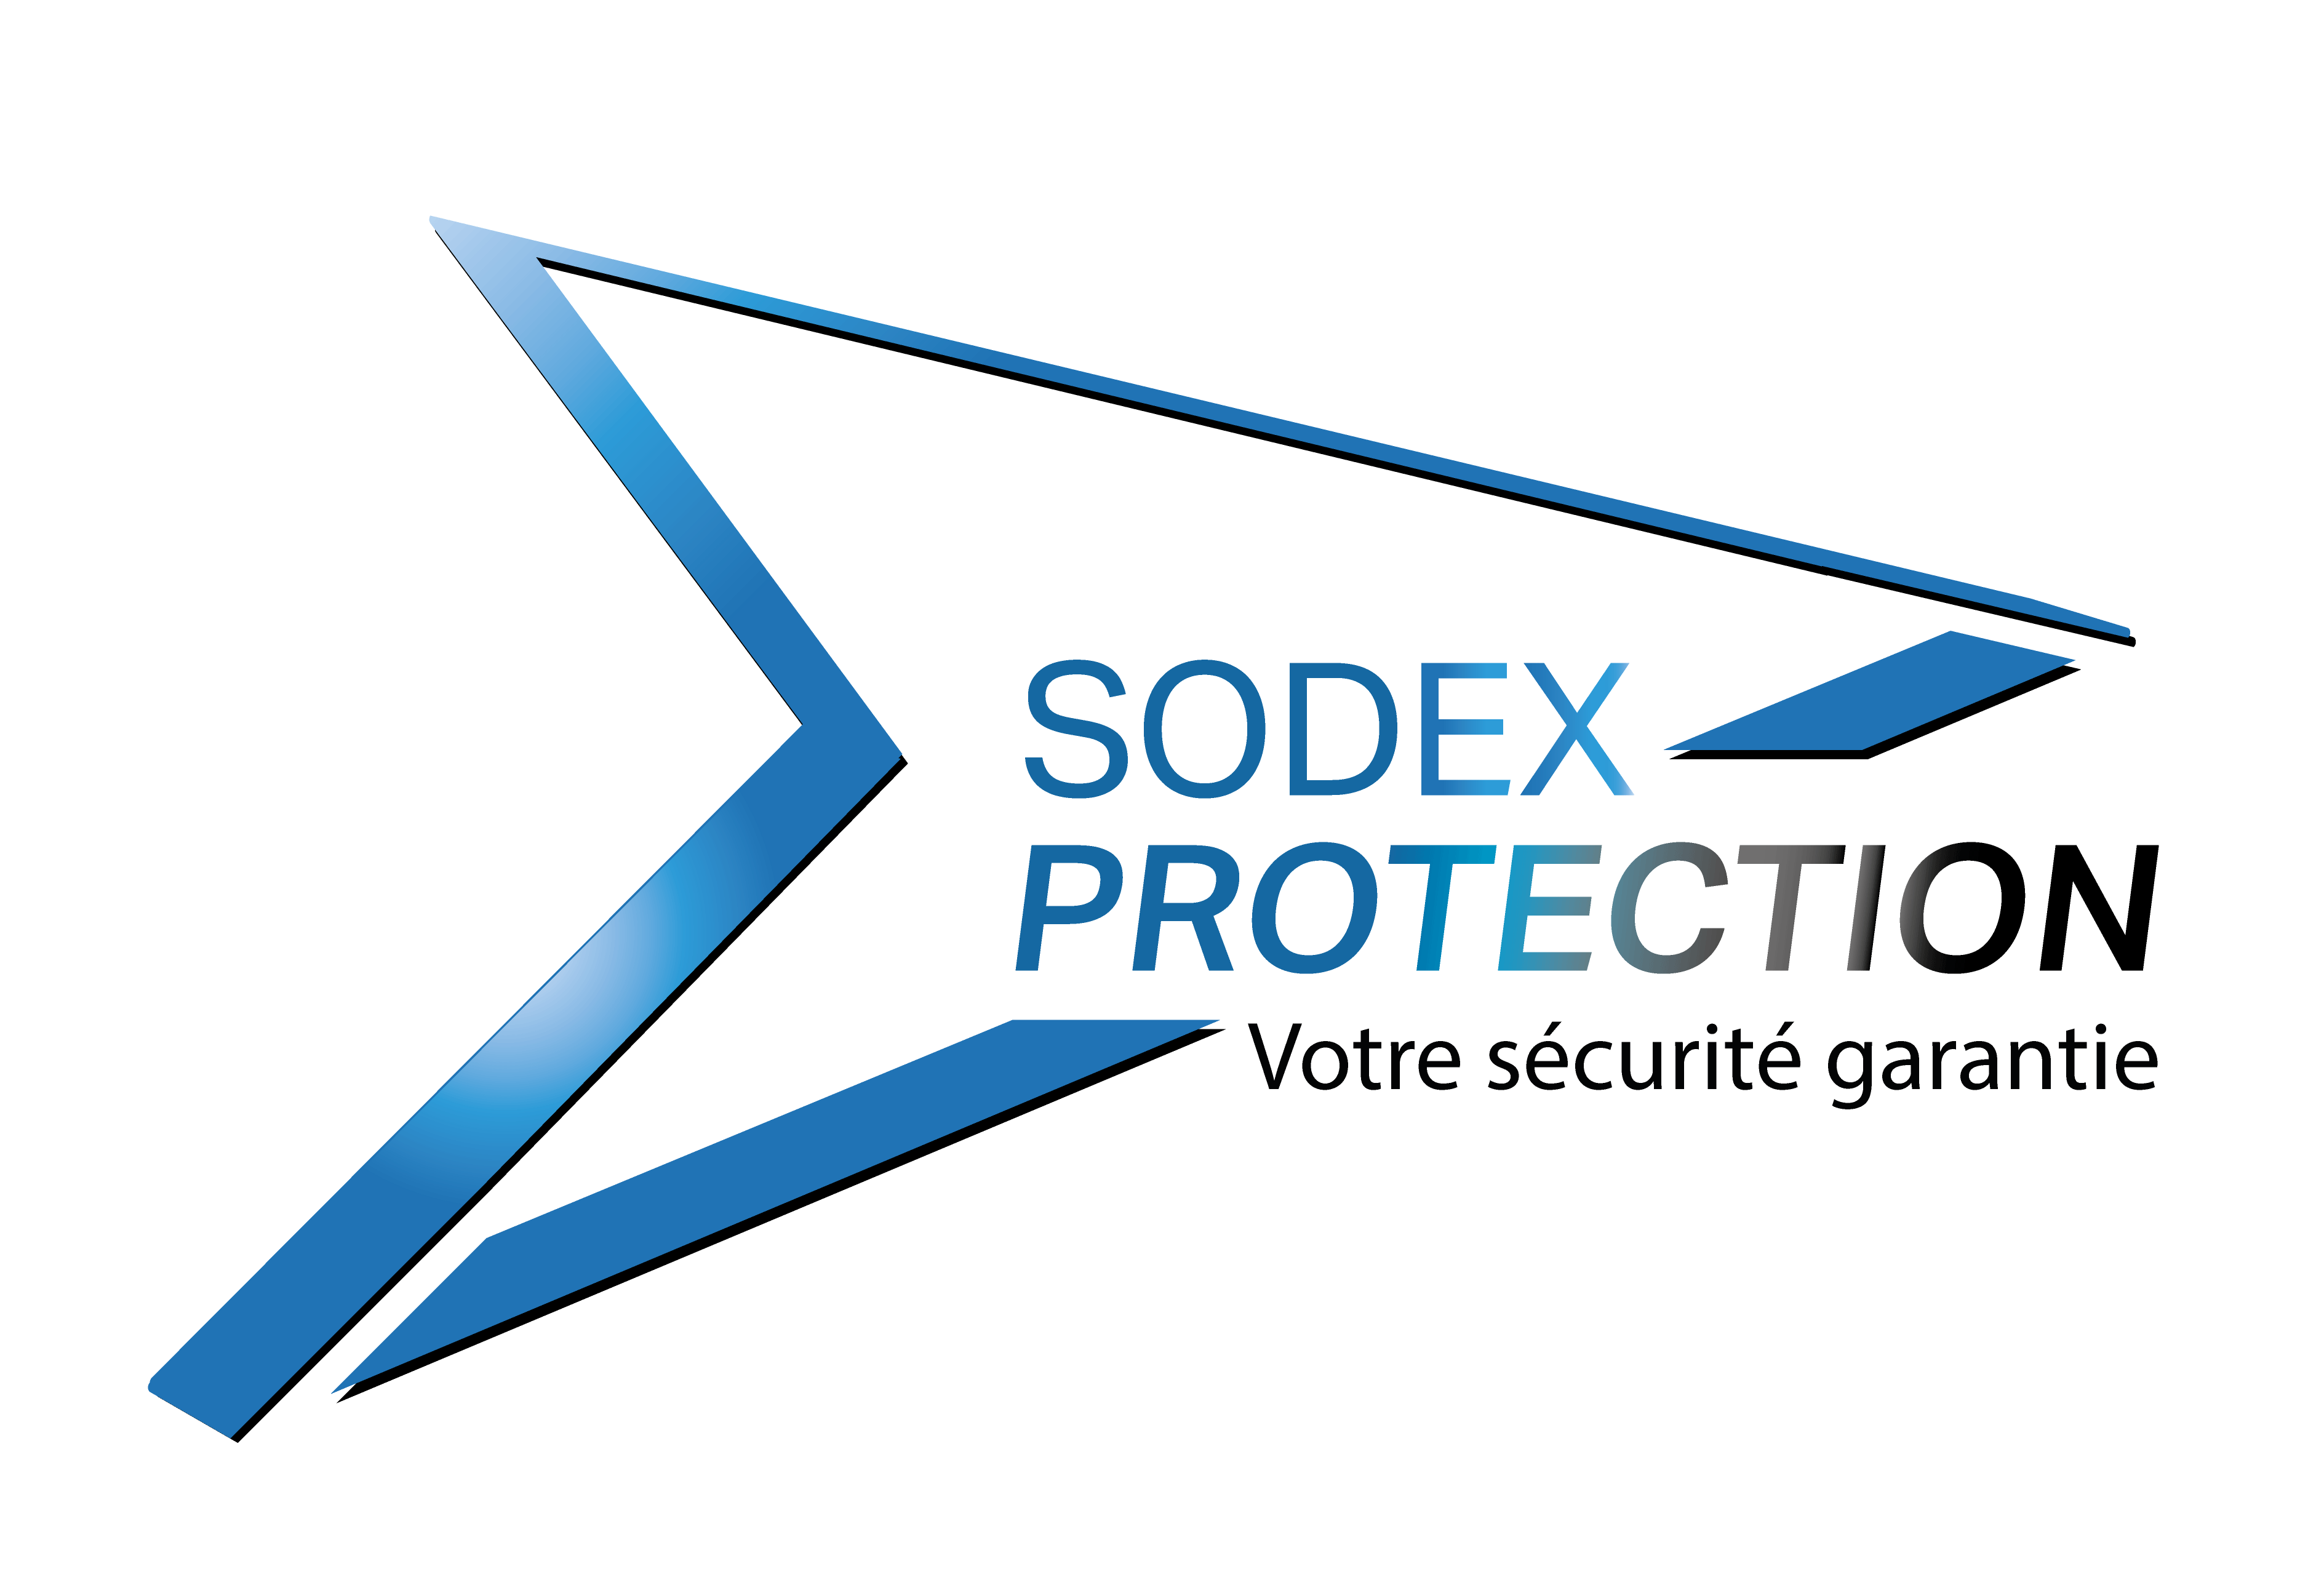 Sodex Protection